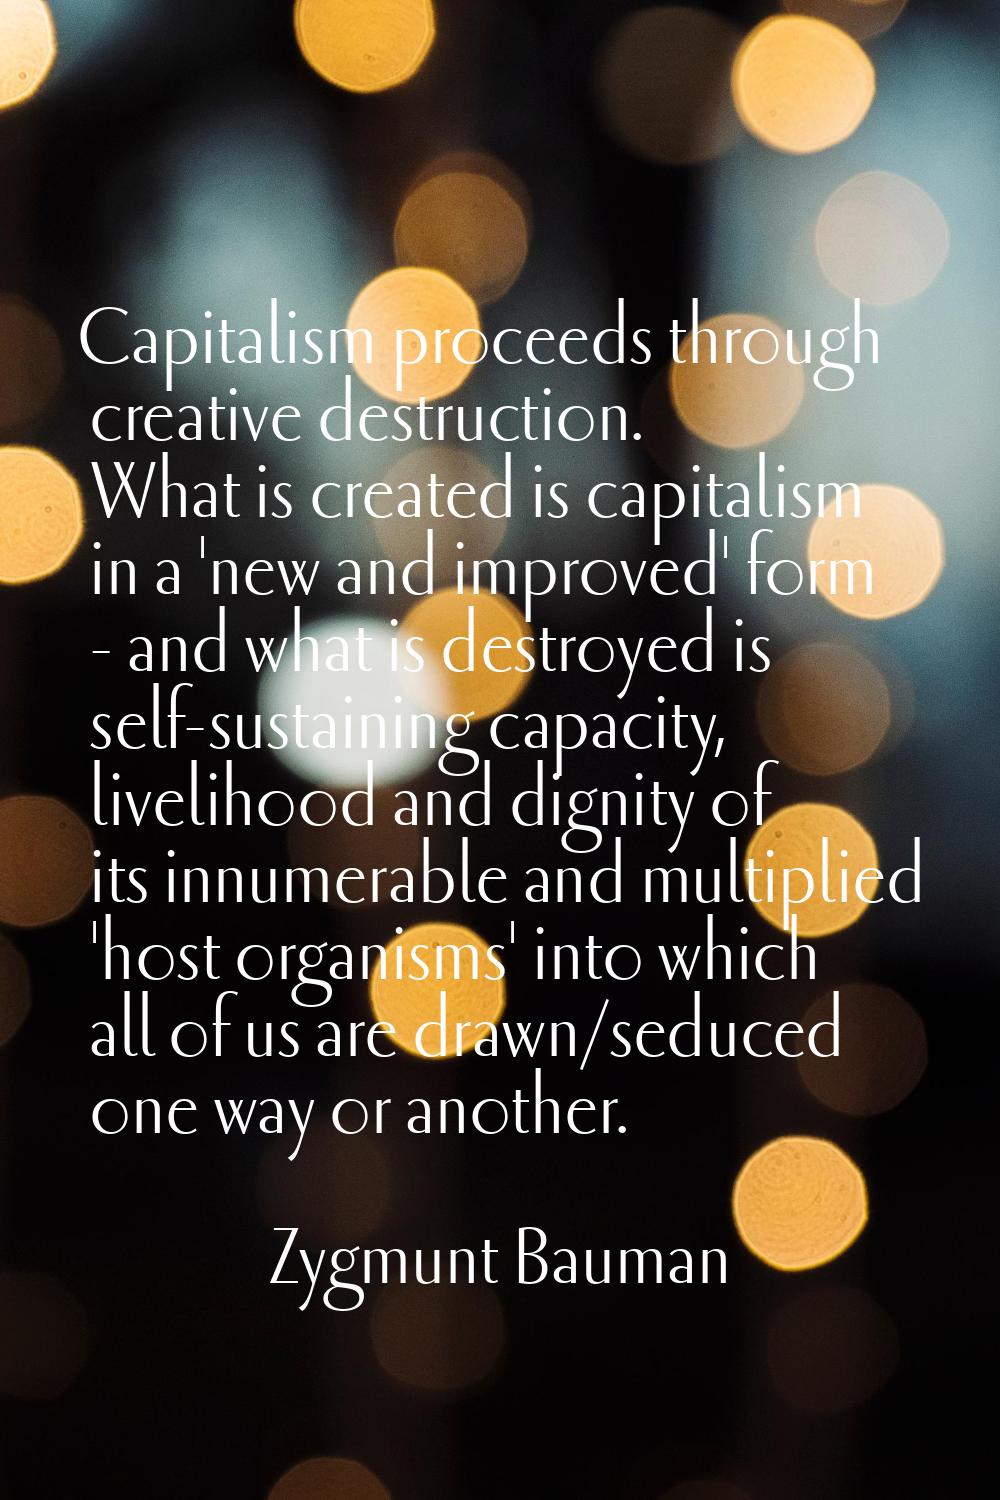 Capitalism proceeds through creative destruction. What is created is capitalism in a 'new and impro